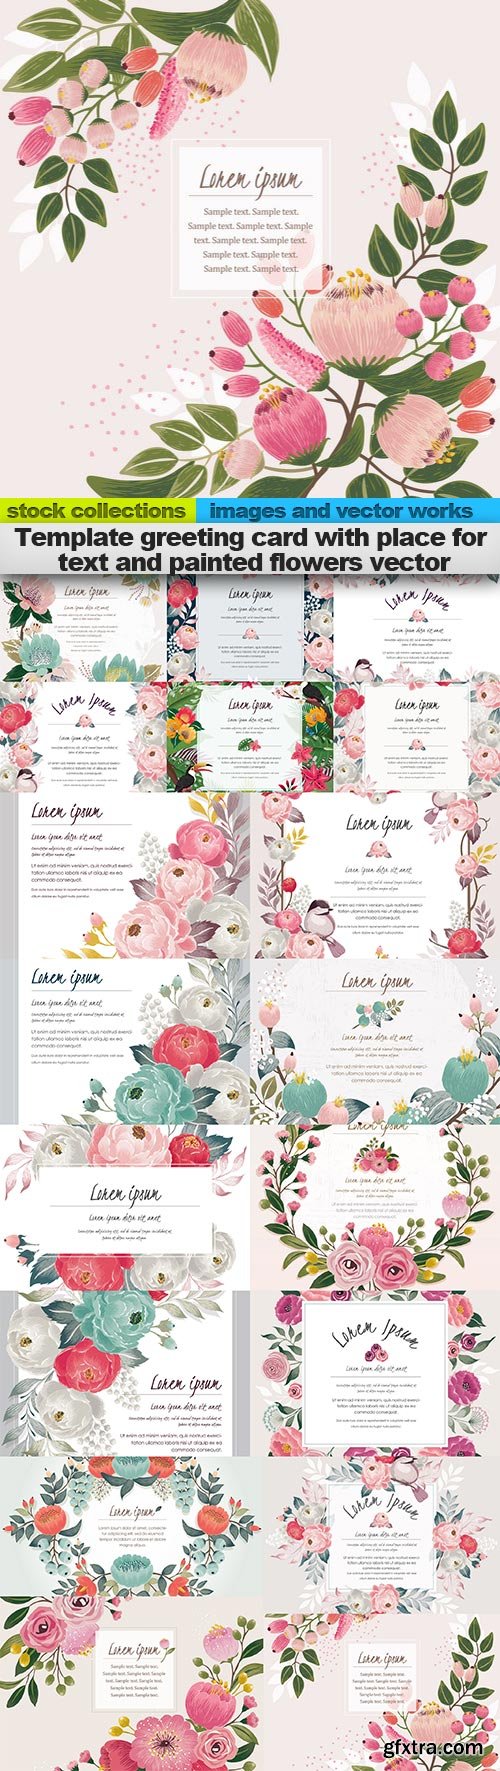 Template greeting card with place for text and painted flowers vector, 18 x EPS